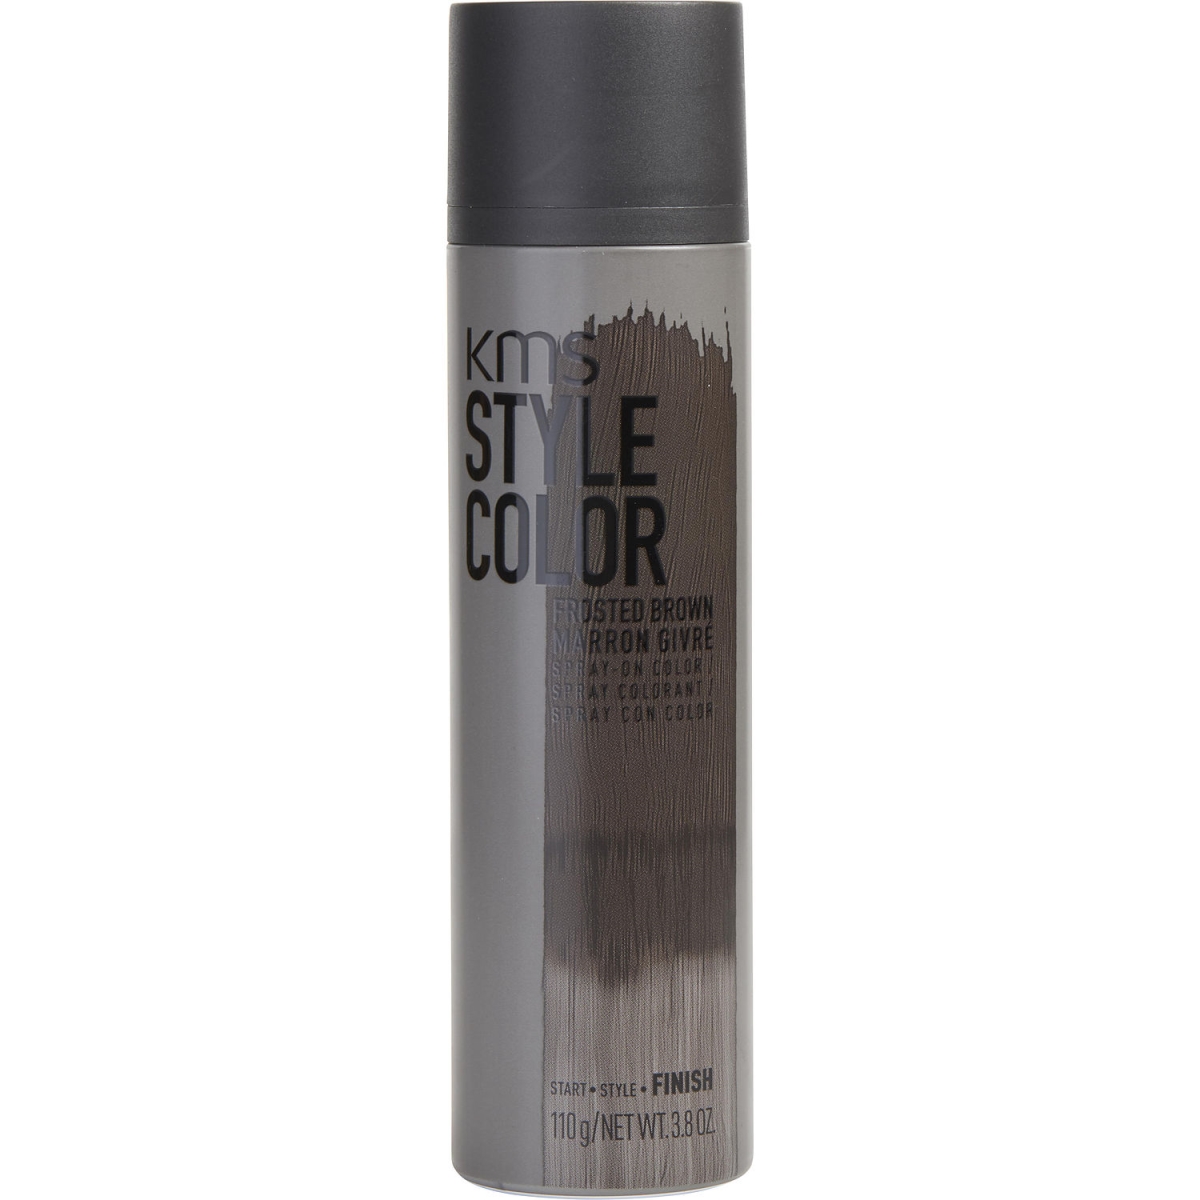 341468 3.8 Oz Unisex Style Color Hair Spray, Frosted Brown